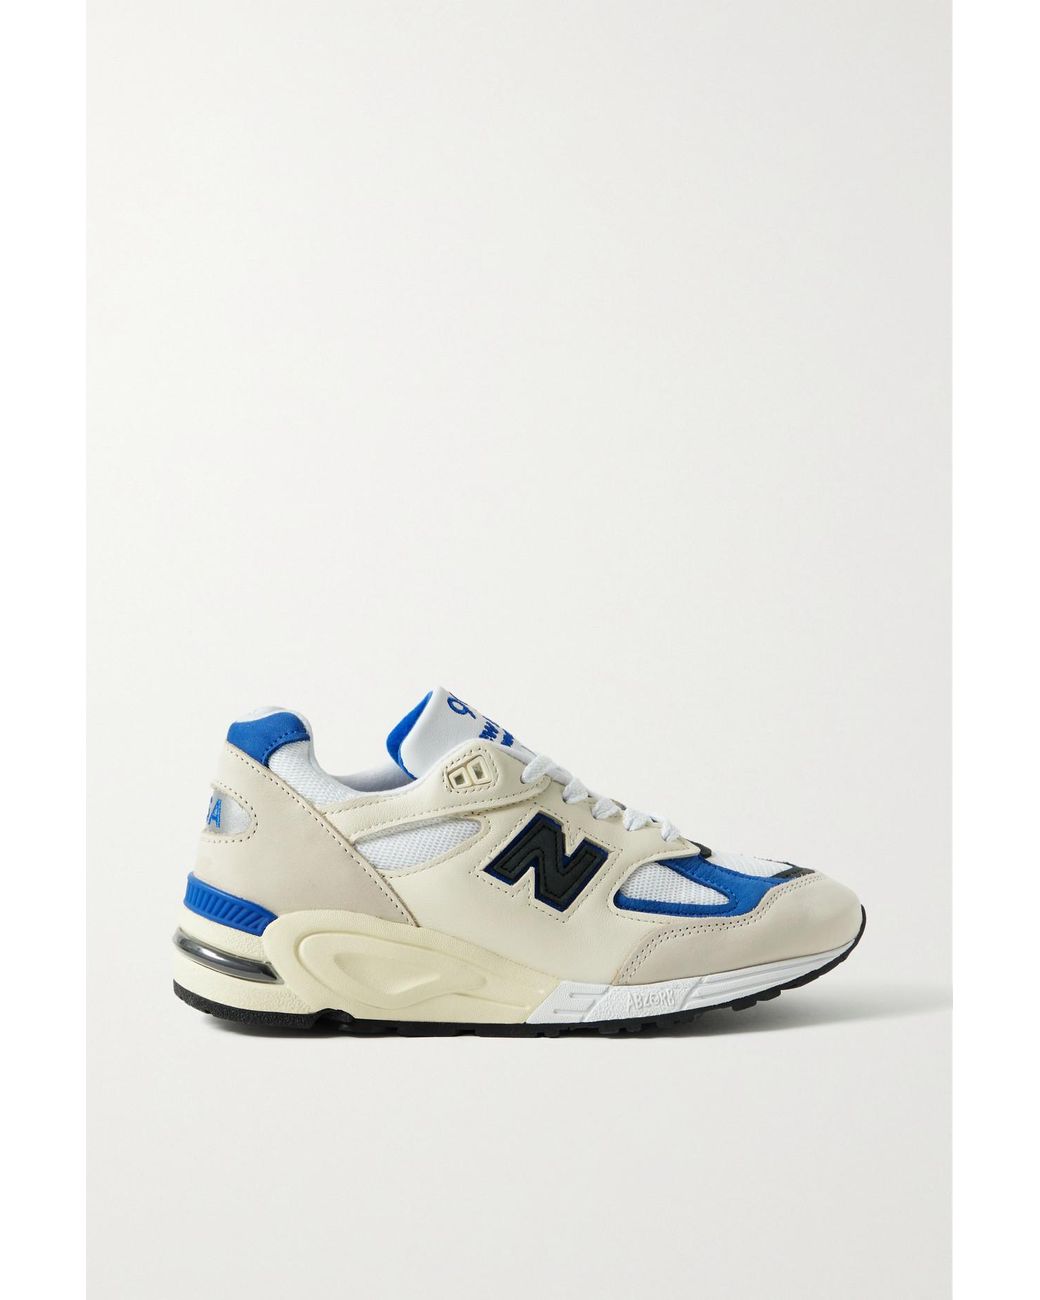 Documento cocinar una comida Cambiarse de ropa New Balance 990 V2 Leather And Suede-trimmed Mesh Sneakers in Blue | Lyst